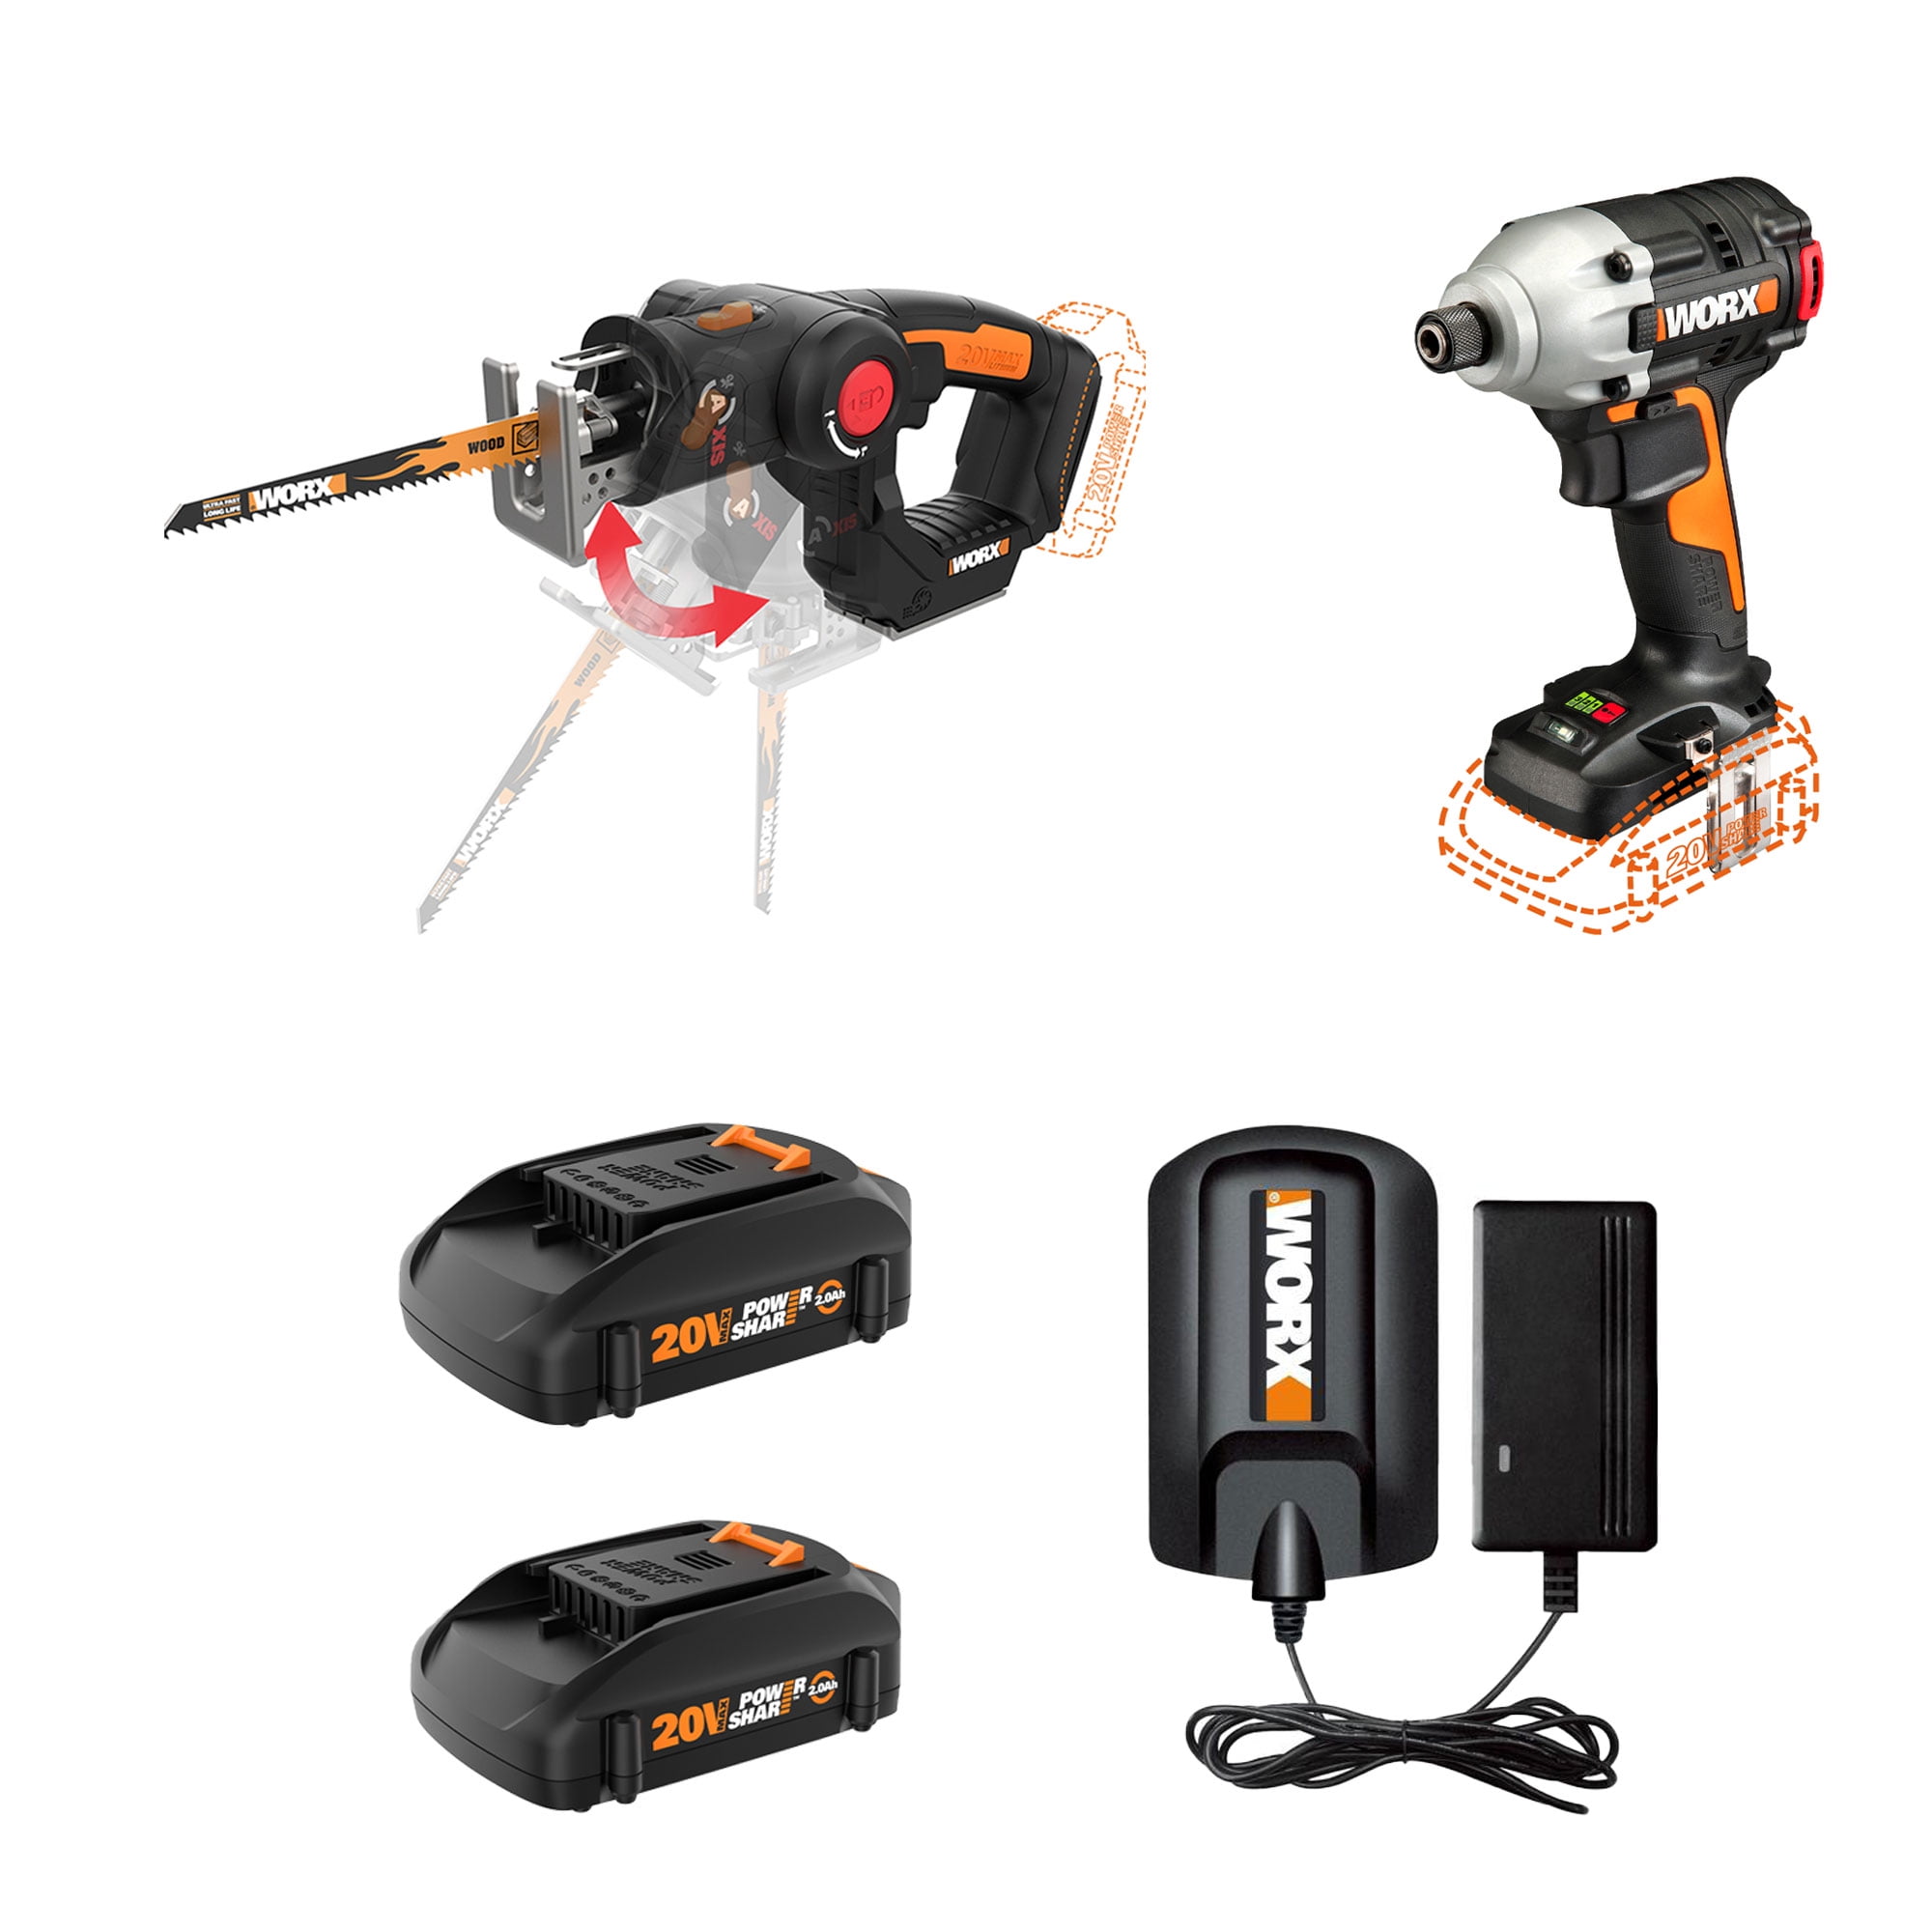 WX101L.4 Worx 20V MaxLithium Cordless Drill/Driver with 30 pc